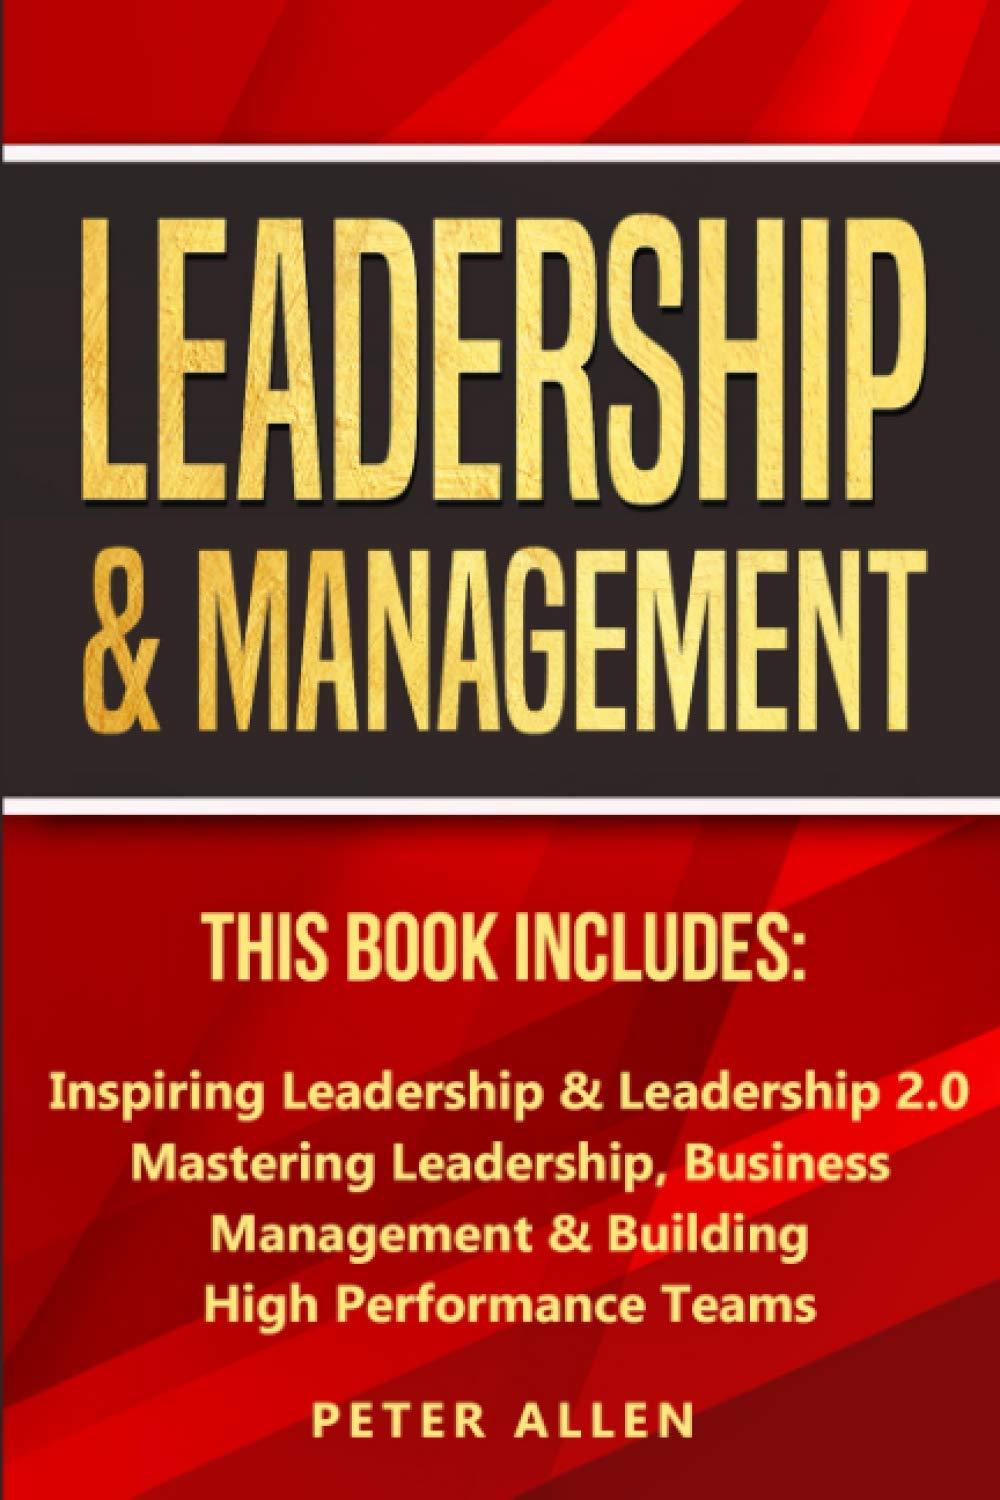 leadership and management this book includes inspiring leadership and leadership 2.0 mastering leadership